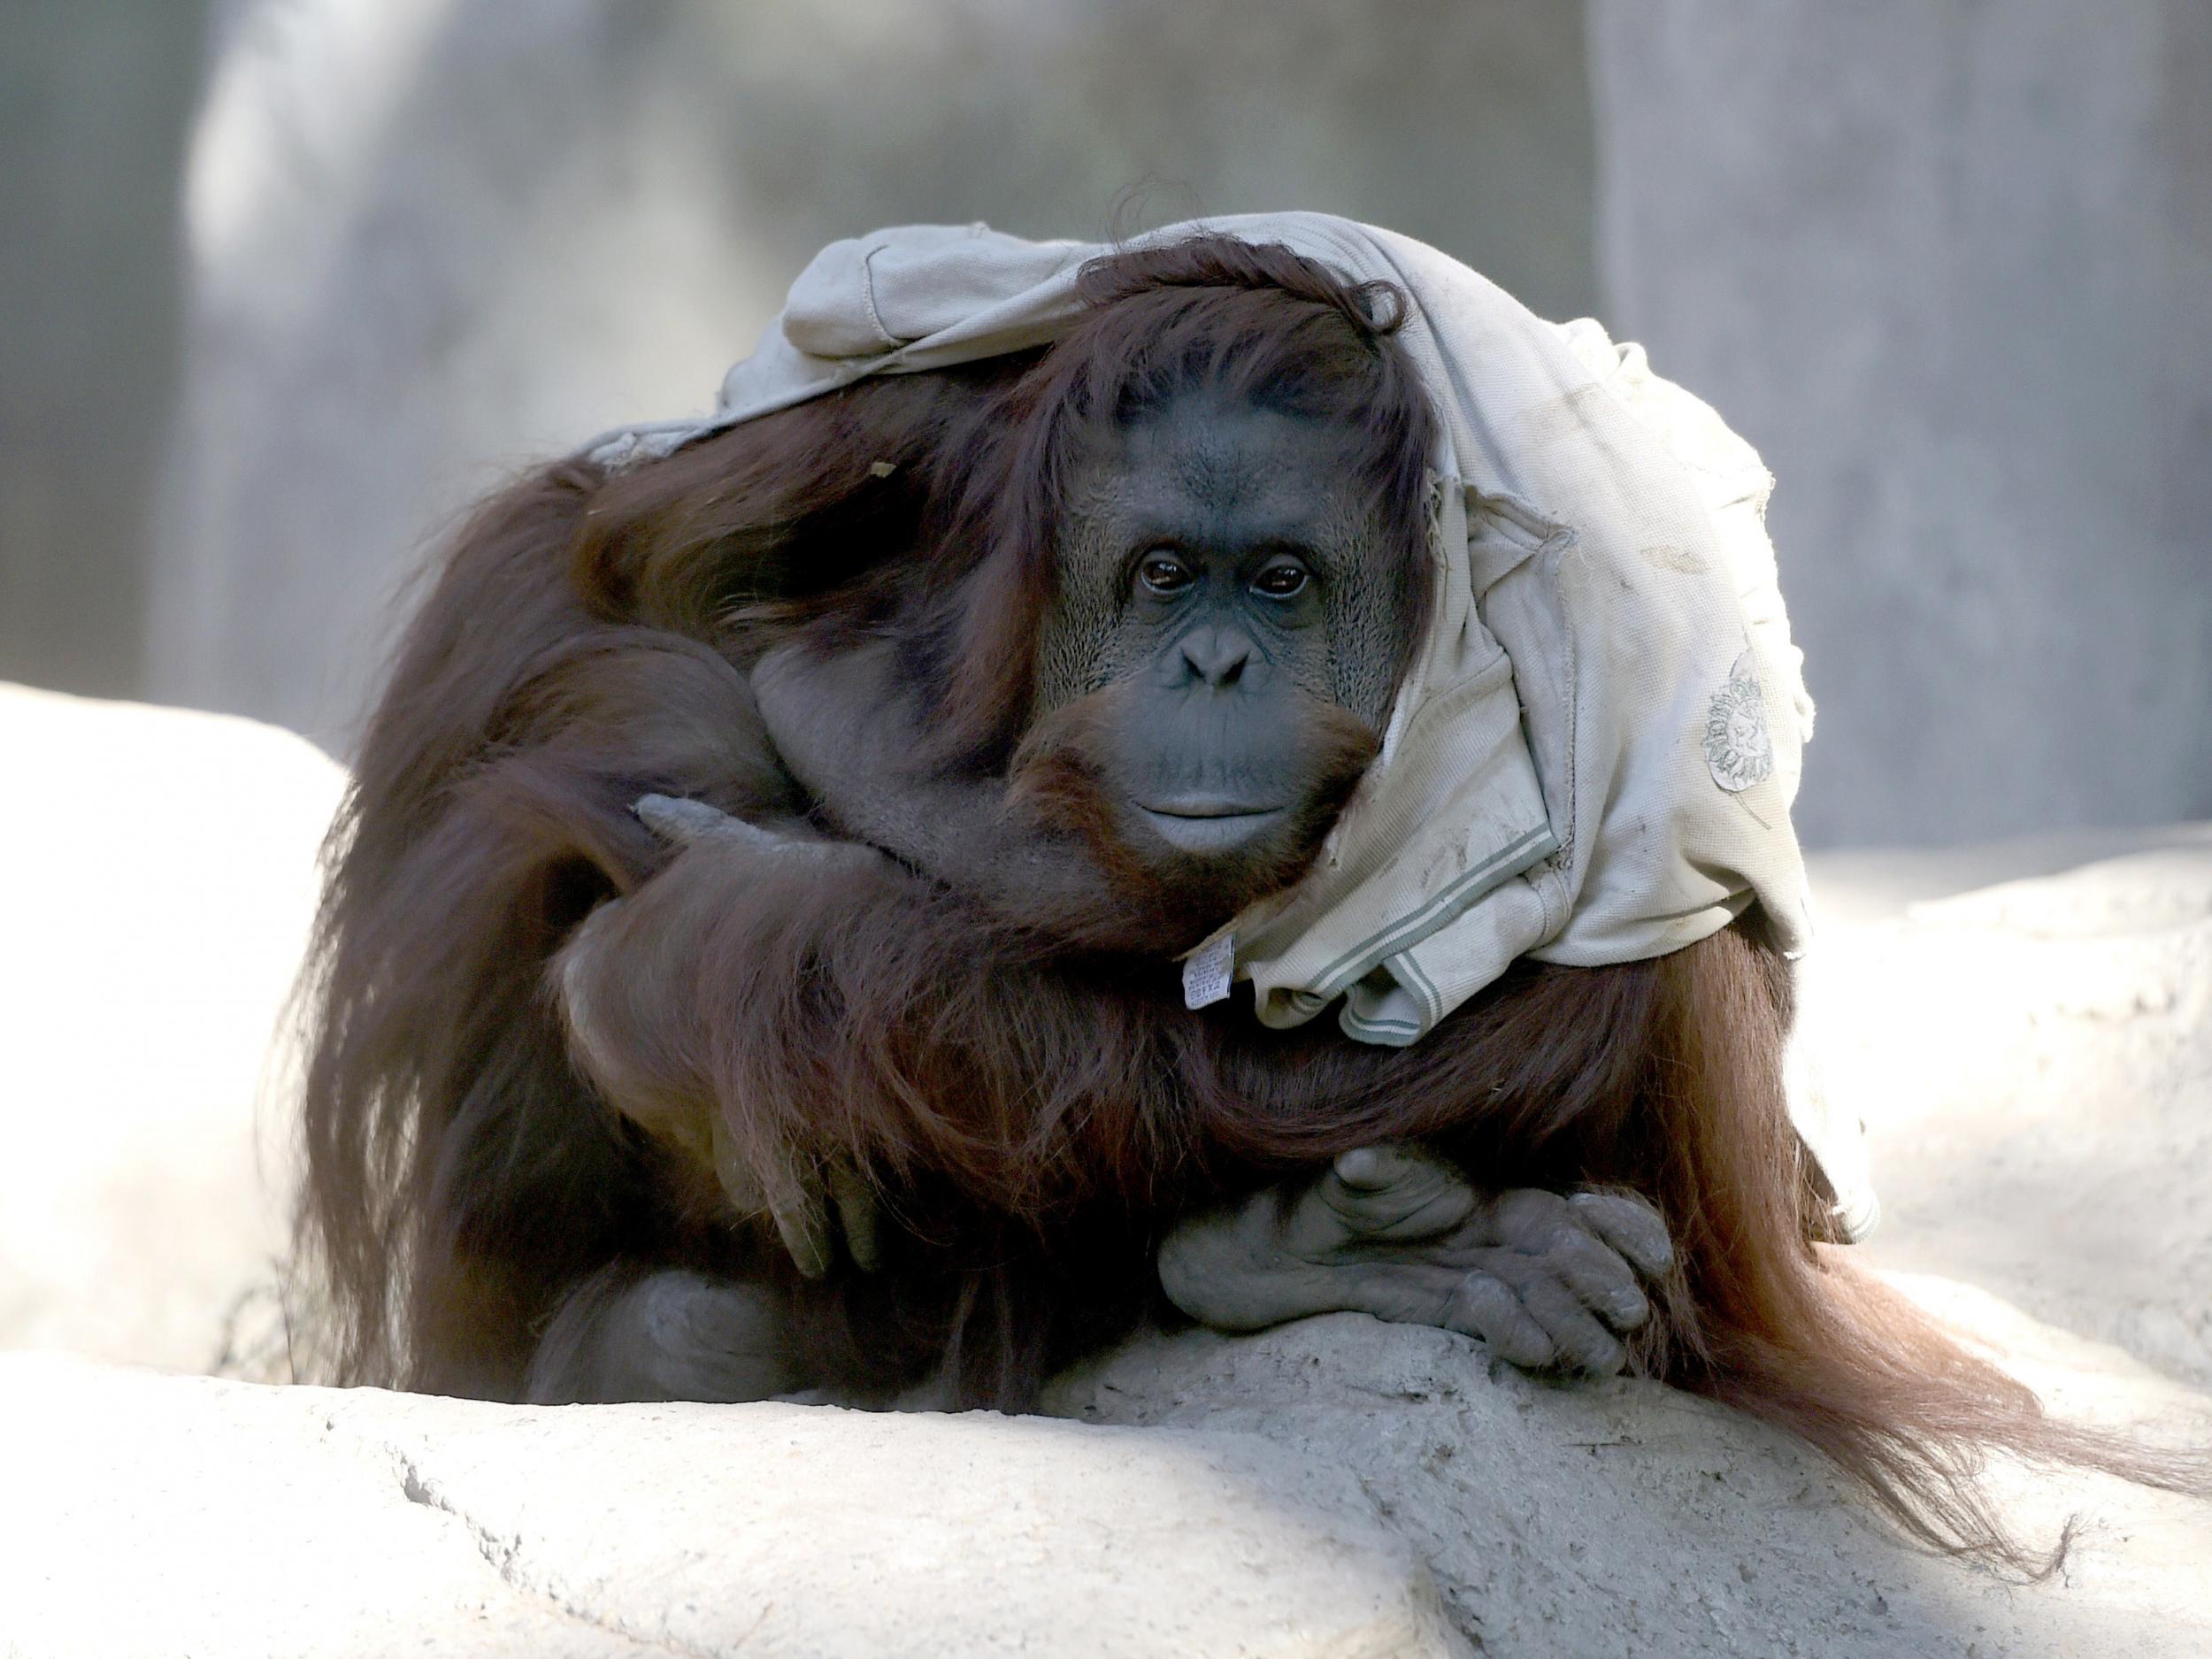 An Argentinian court ruled that Sandra the orangutan had the right not to be held captive in Buenos Aires zoo (AFP/Getty)